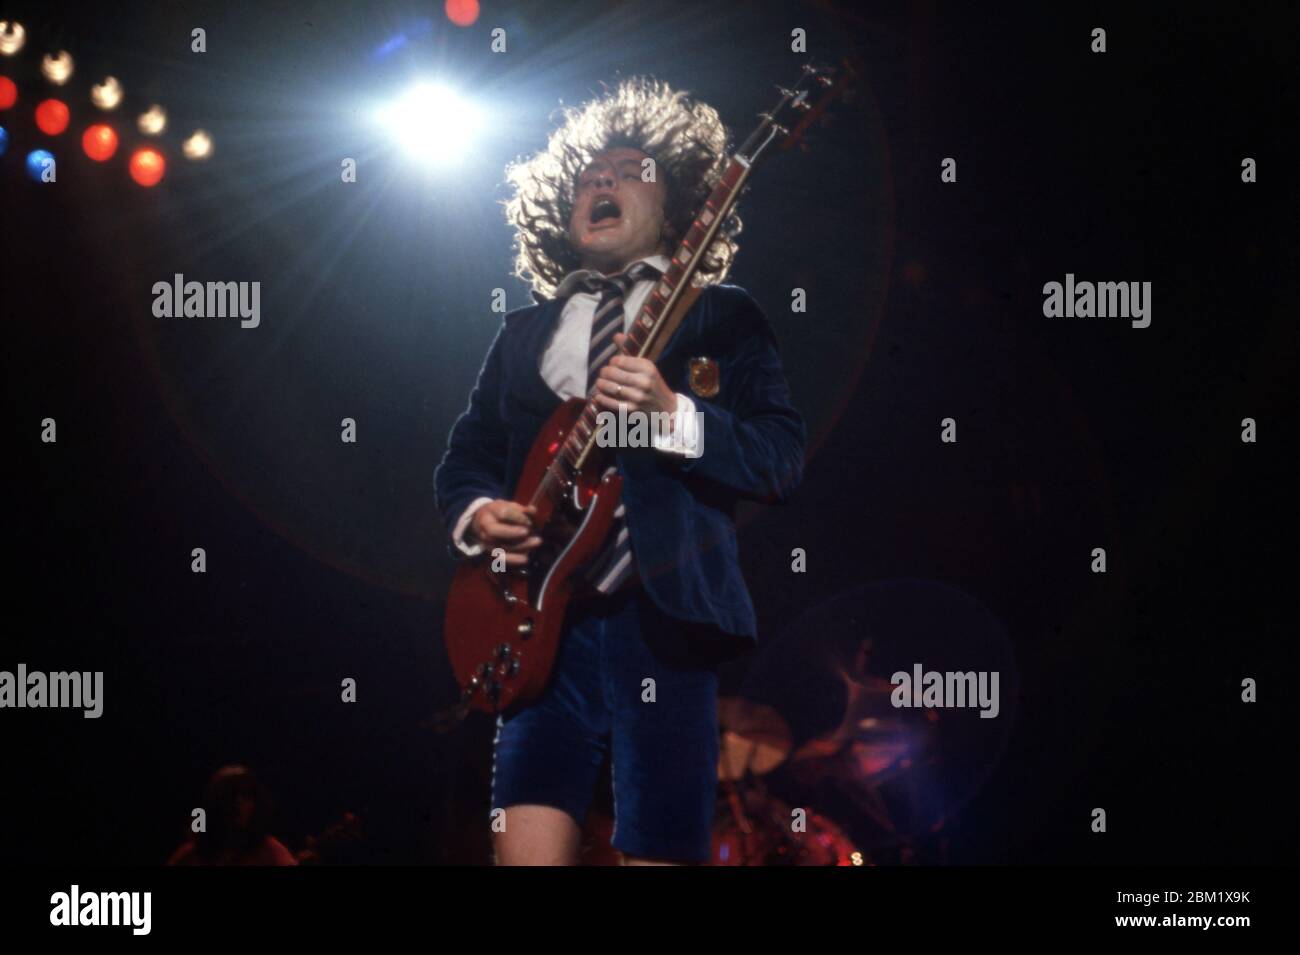 DETROIT - NOVEMBER 17: Angus Young, lead guitarist for AC/DC, wearing his iconic British schoolboy uniform and playing his red Gibson SG, performs during the Flick of the Switch/Monsters of Rock tour, on November 17, 1983, in Detroit, Michigan. (Photo by Ross Marino/Rock Negatives) Stock Photo